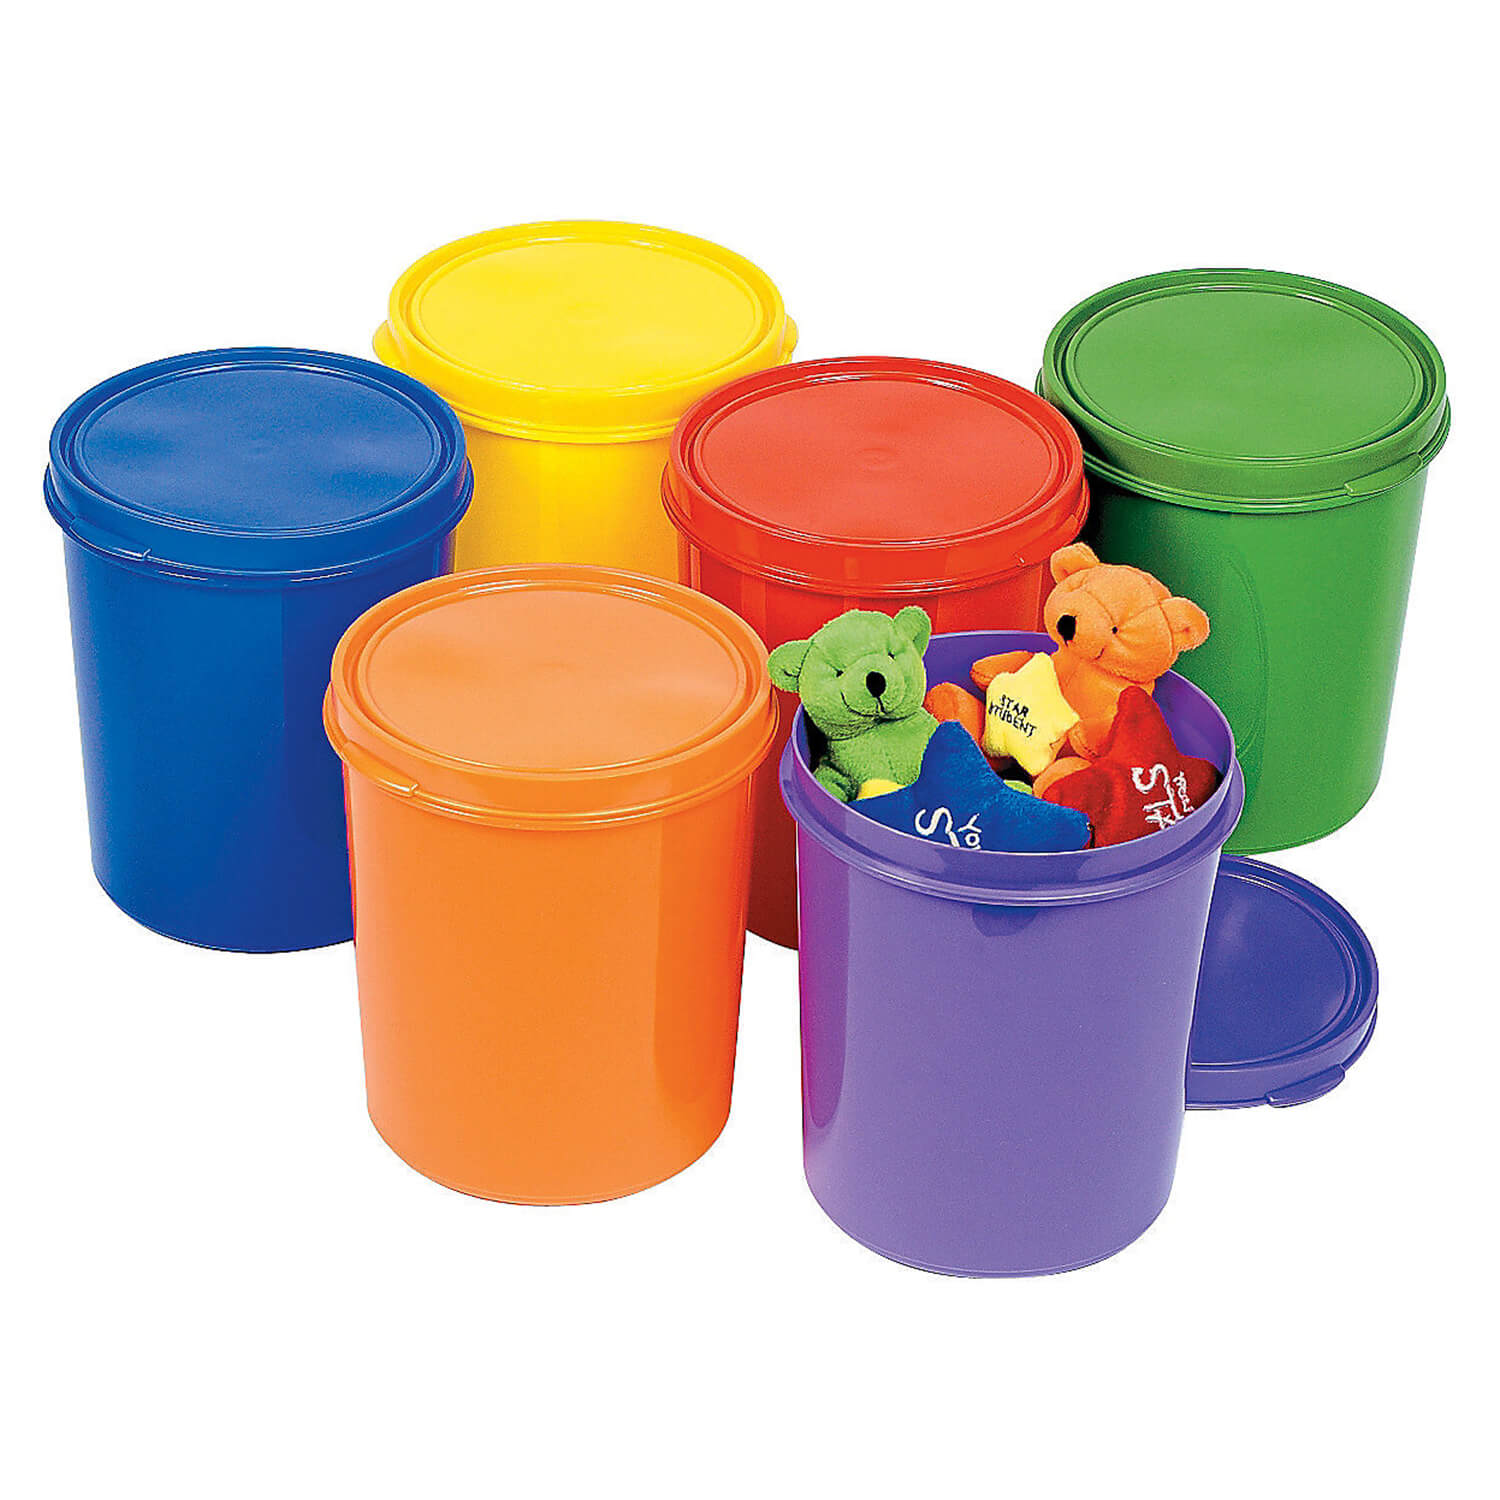 W16762101 Round Containers With Lids - 6 Pc.